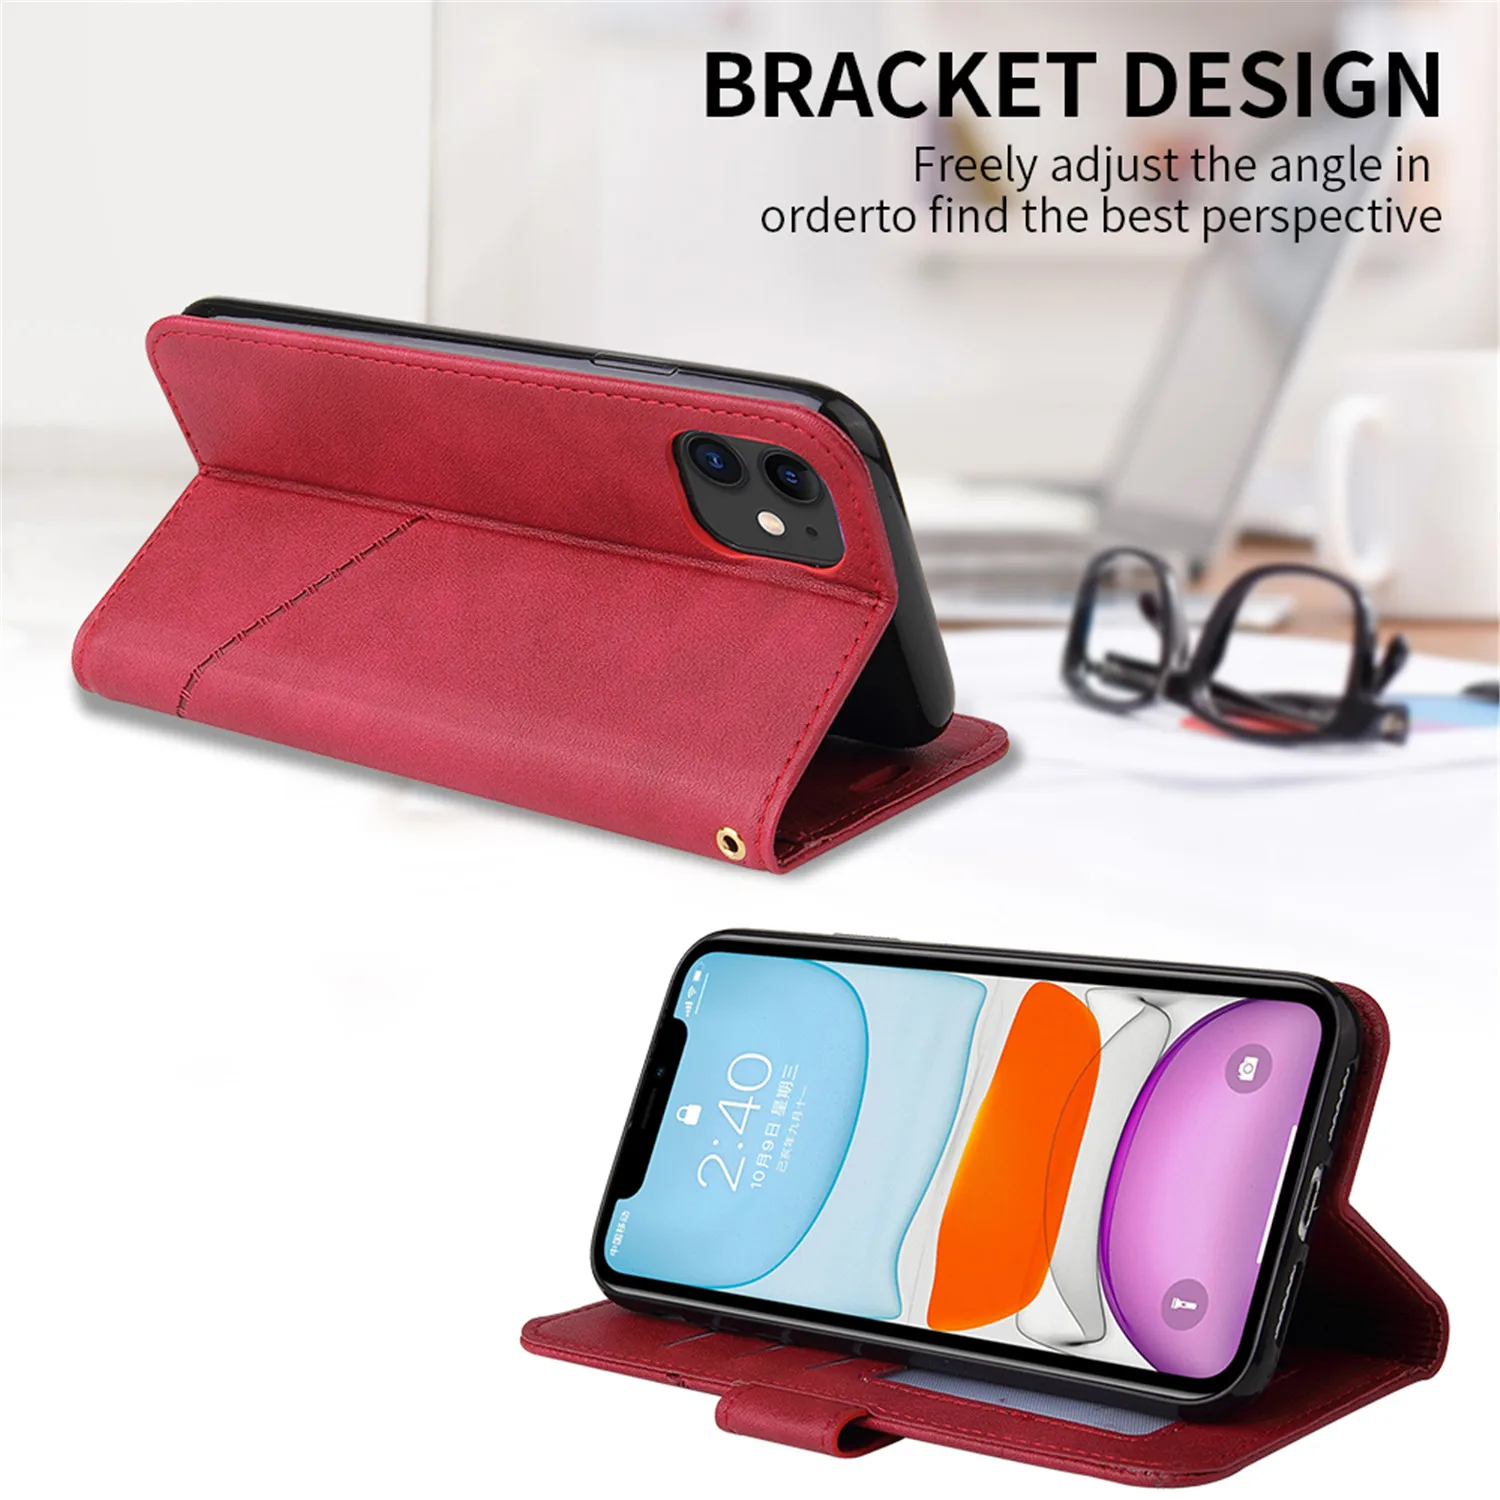 Luxury Leather Flip Case For Xiaomi Redmi Note 10S 9 8T 7 Pro Redmi 7A 8A 9A 9C 9T K20 K40 Wallet Holder Stand Cover Phone Coque images - 6